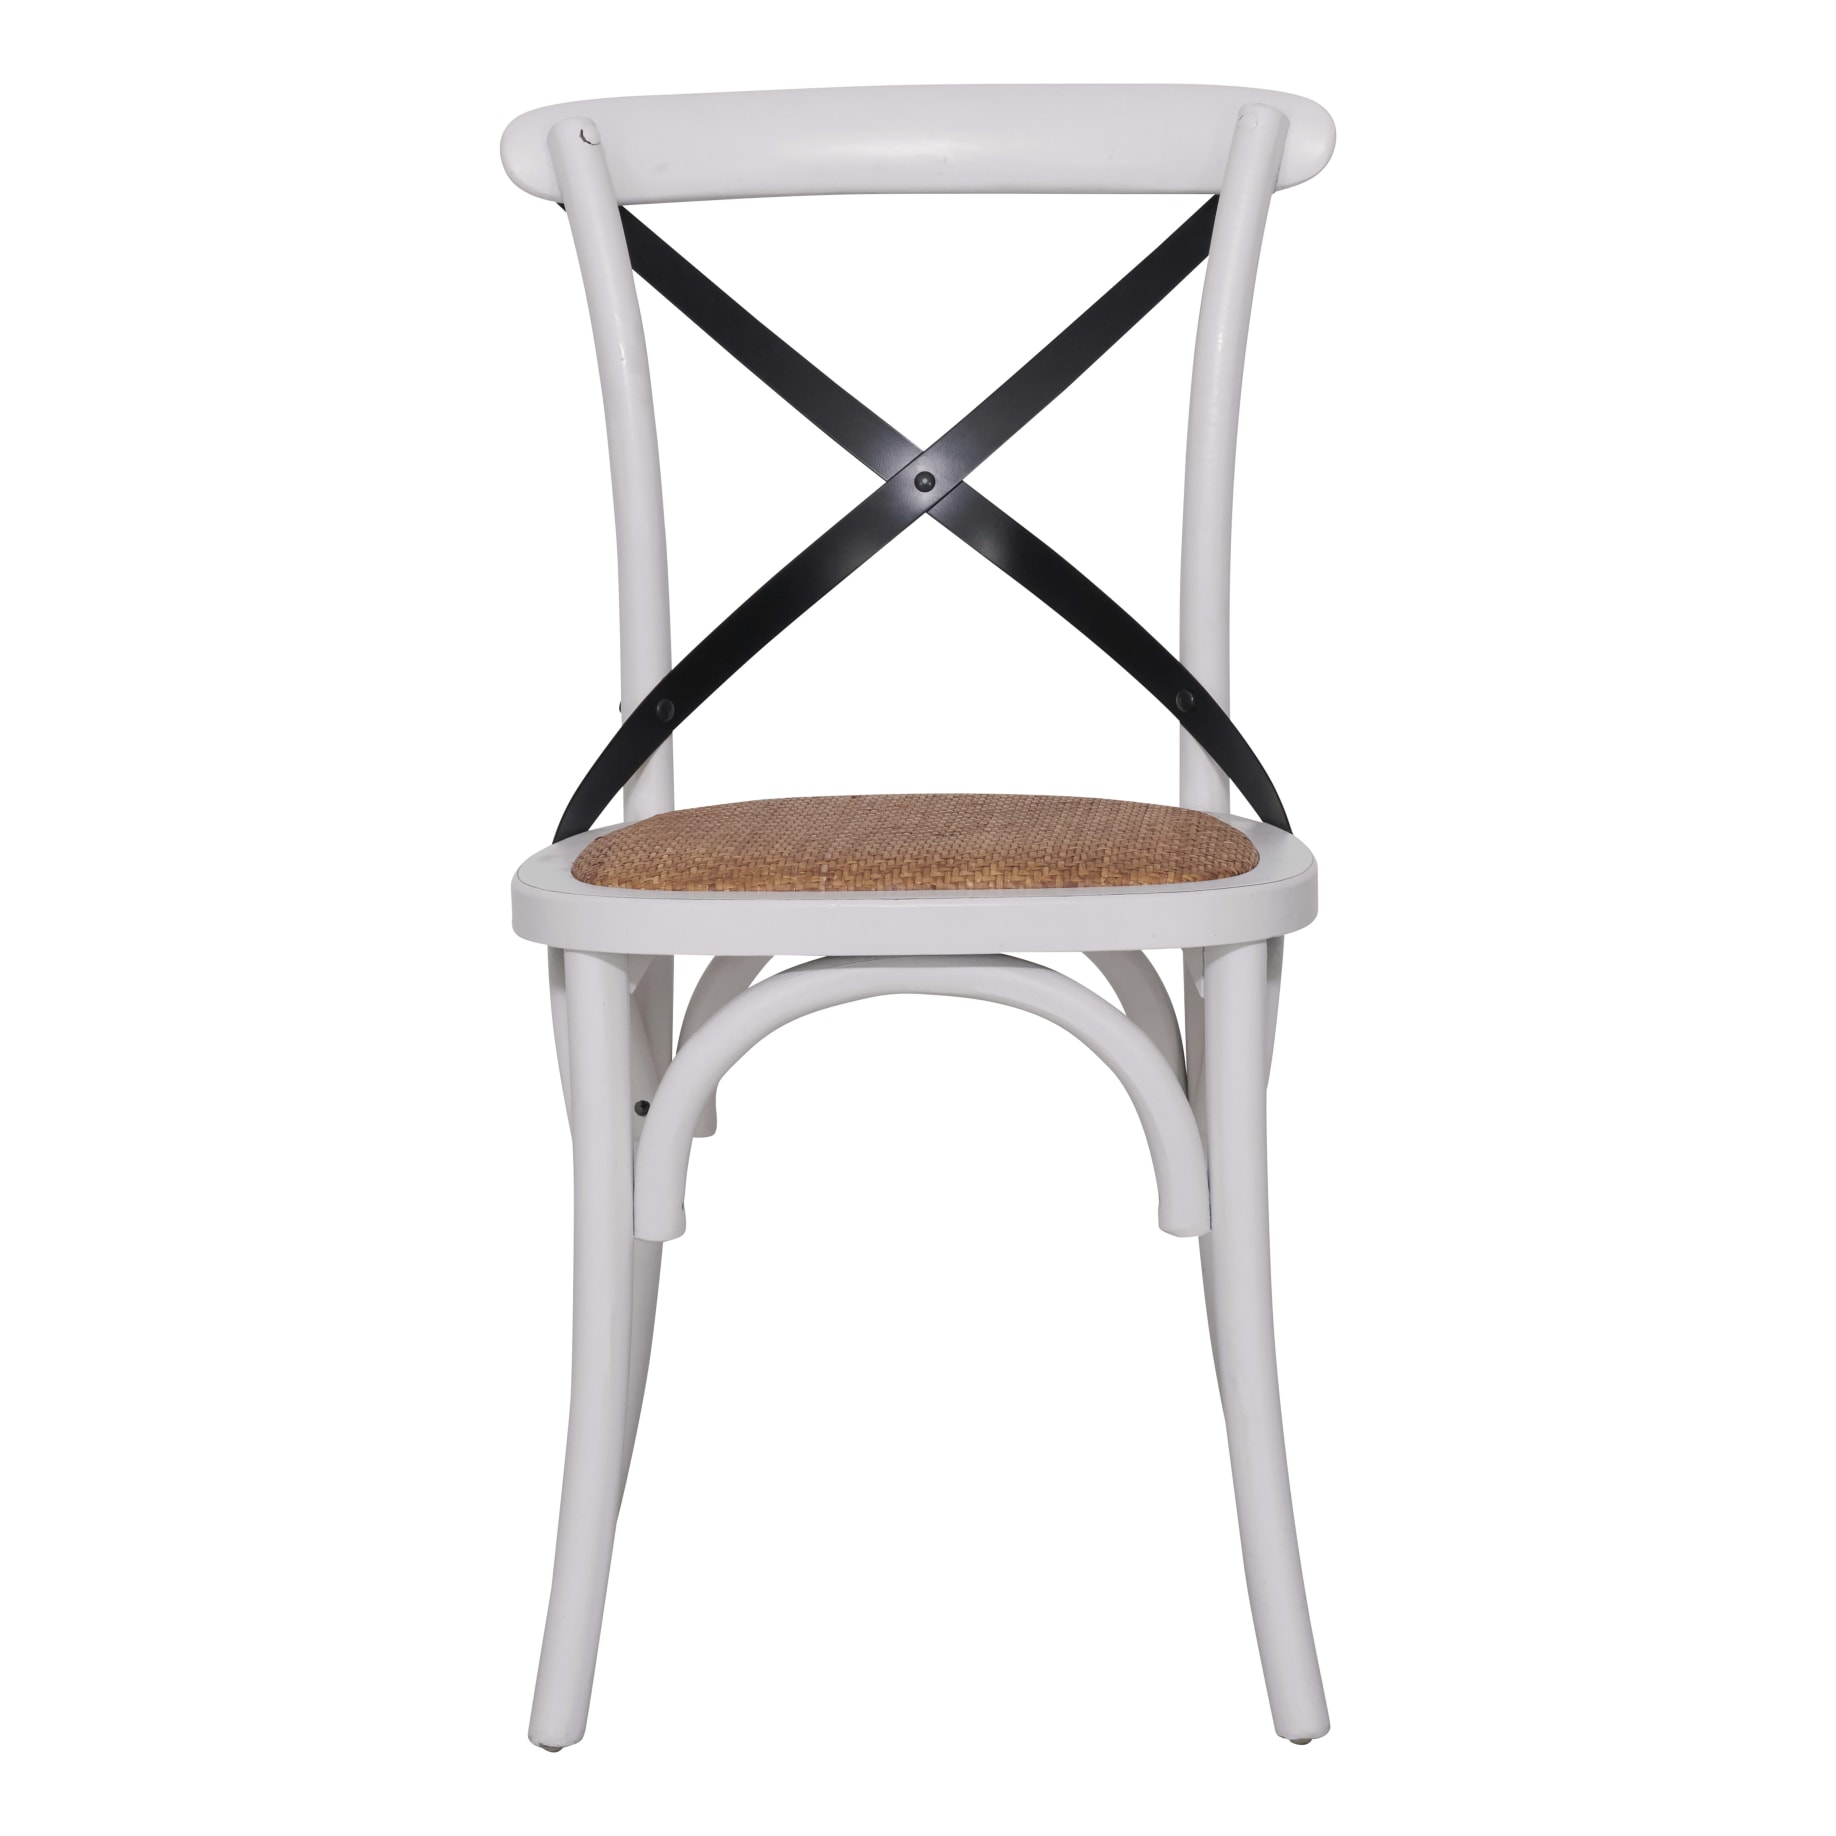 Cristo Cross Back Chair in Weathered White / Black Strap / Rattan